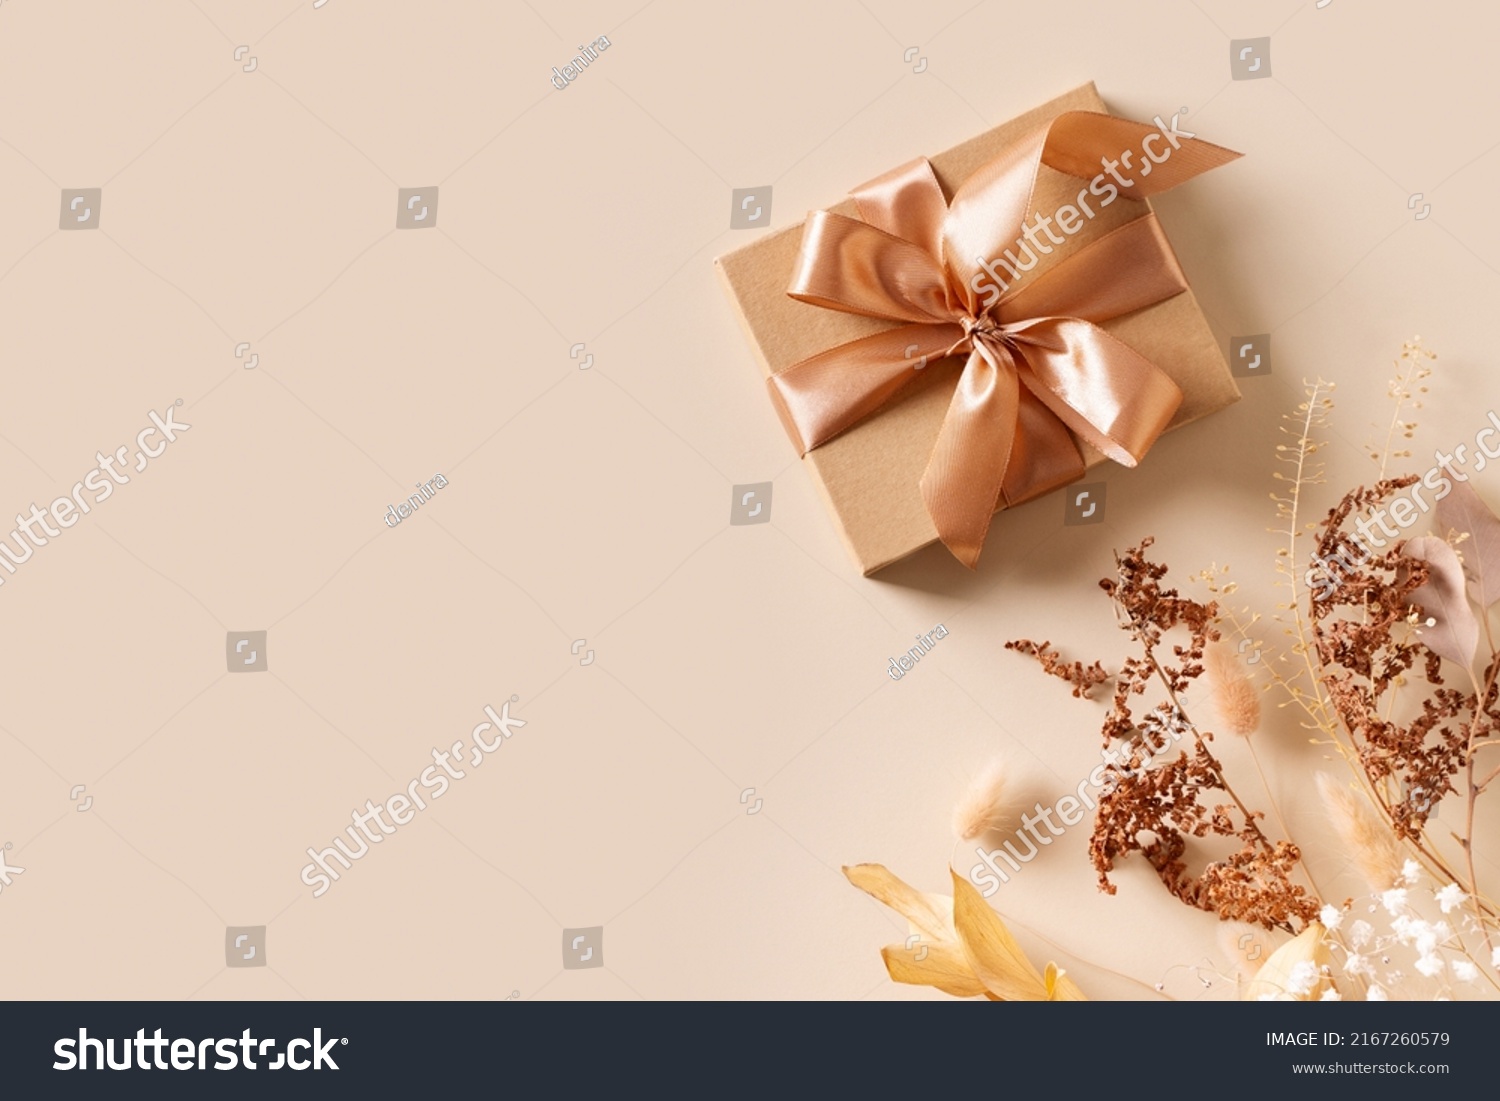 Gift box with golden ribbon and dry grass and flowers on beige background flat lay, top view, copy space #2167260579